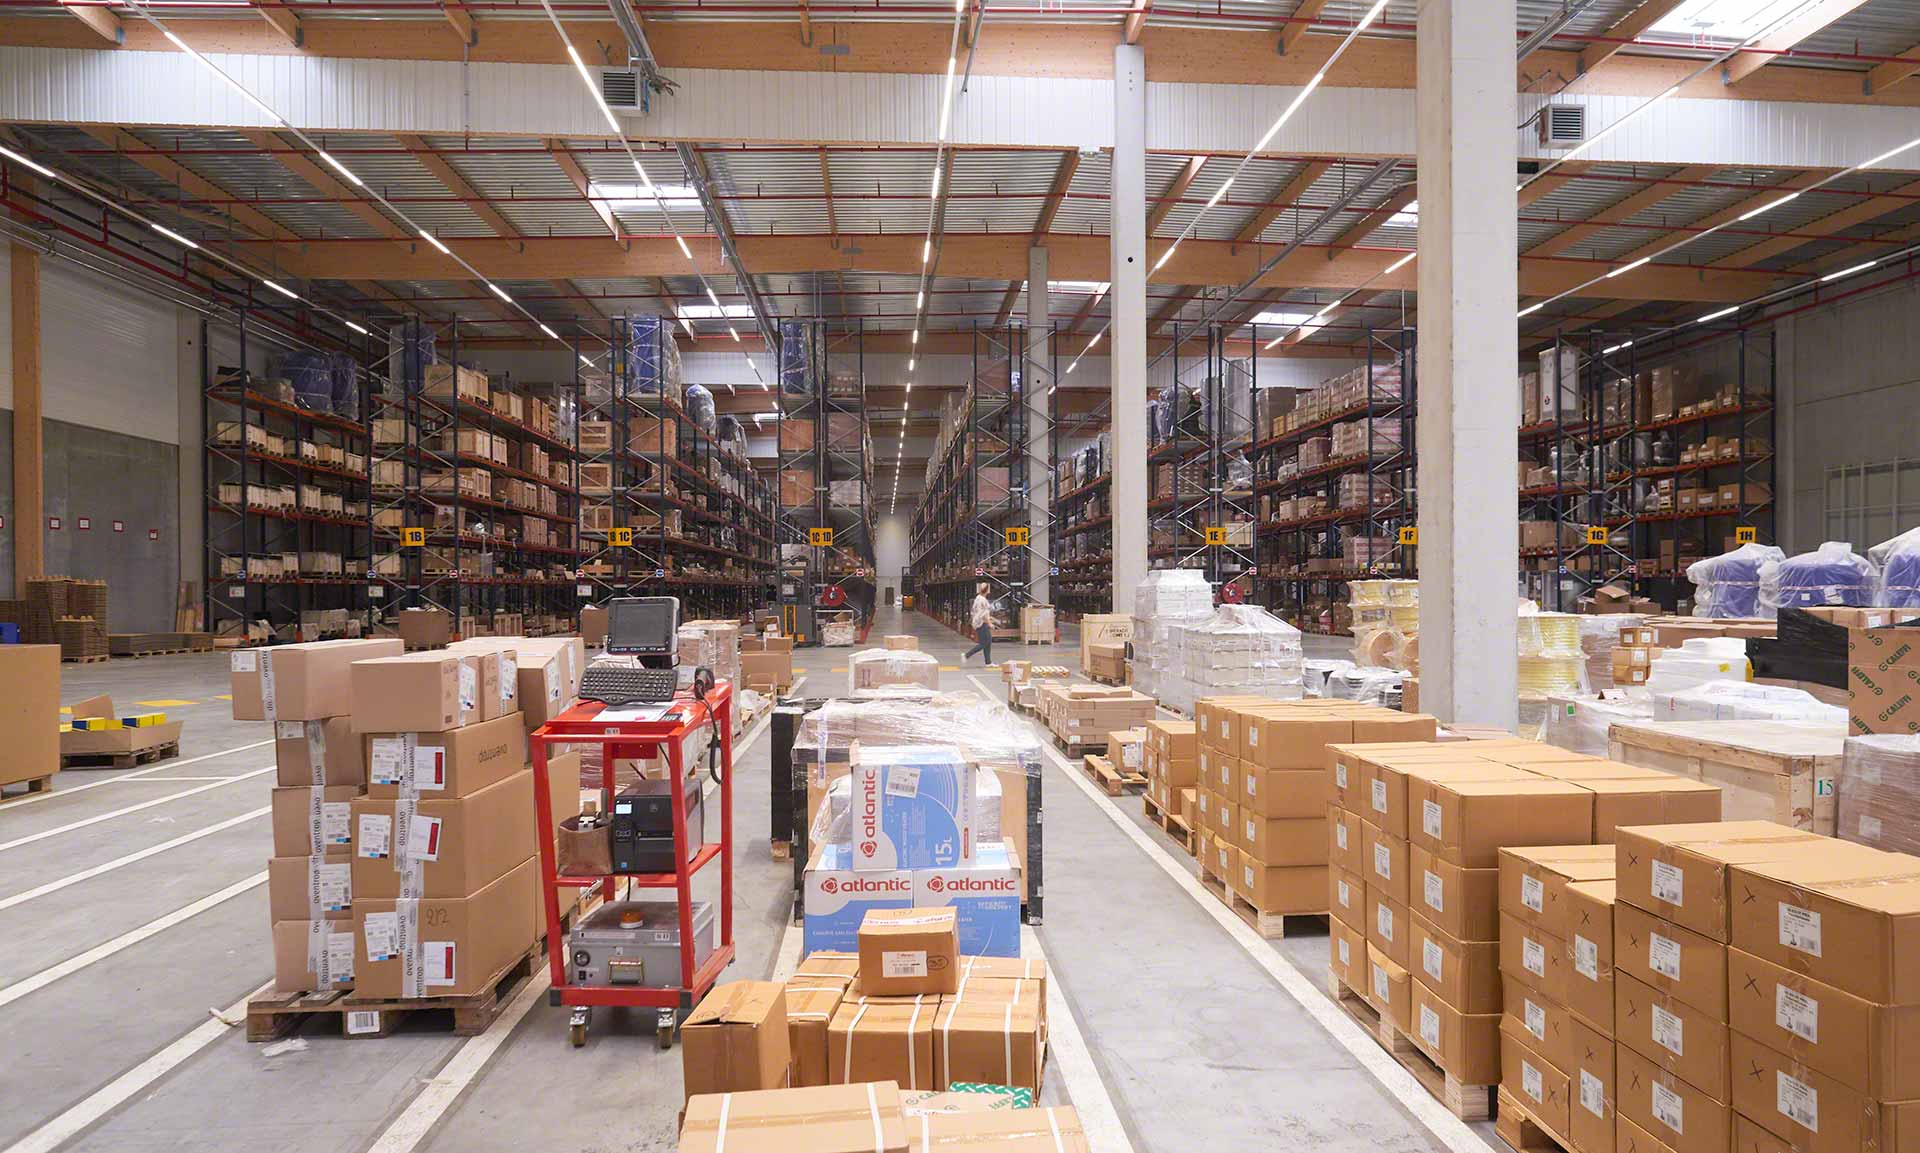 Logistics packaging plays a major role in order fulfillment processes